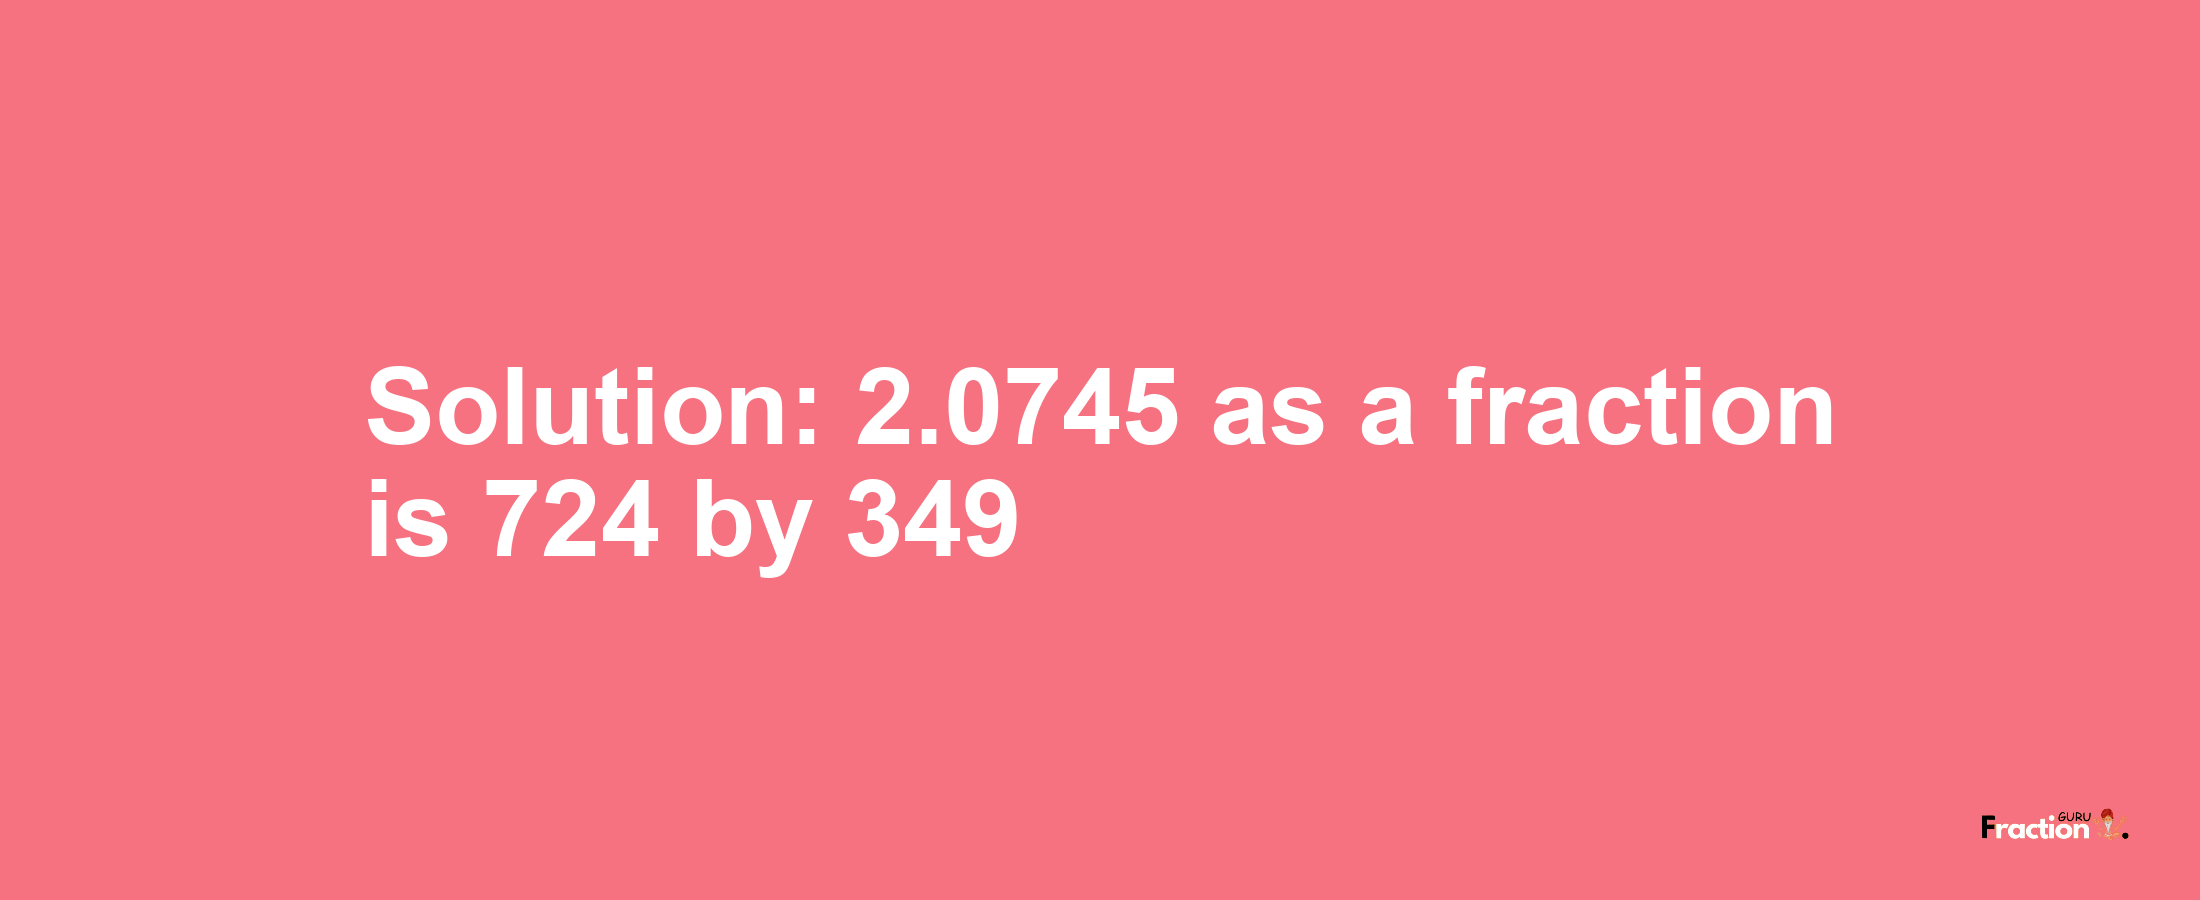 Solution:2.0745 as a fraction is 724/349